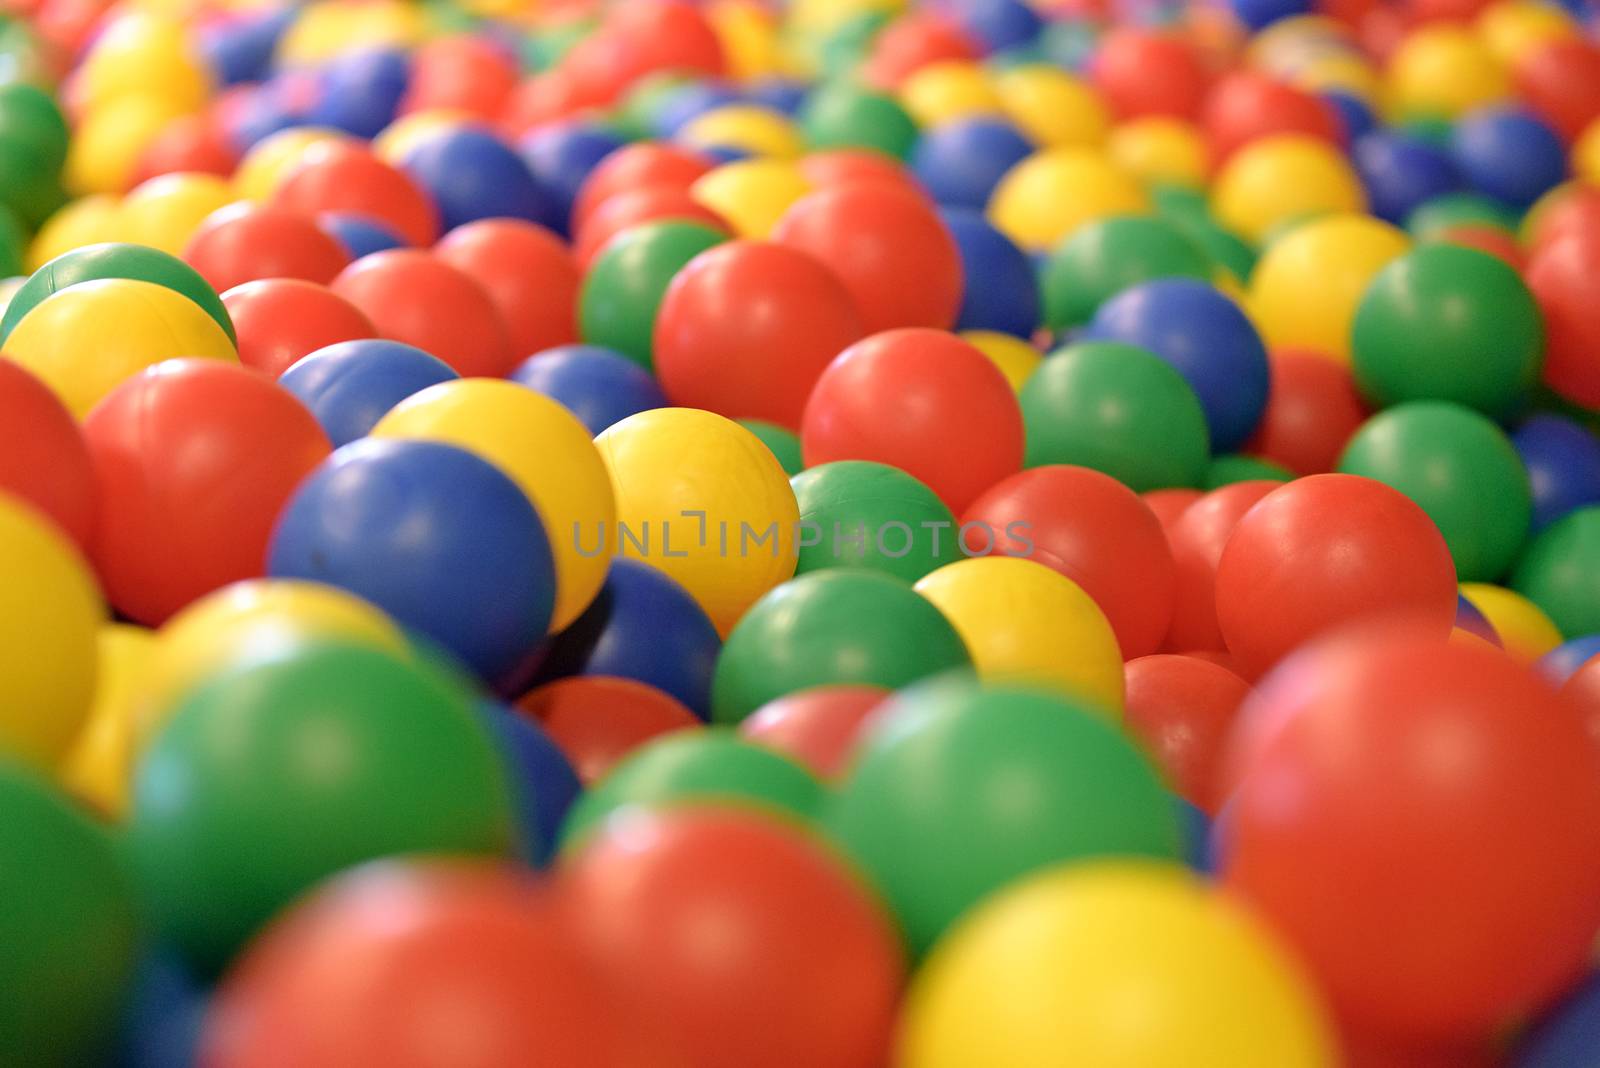 Multicolored background with plastic balls in children's play pool.